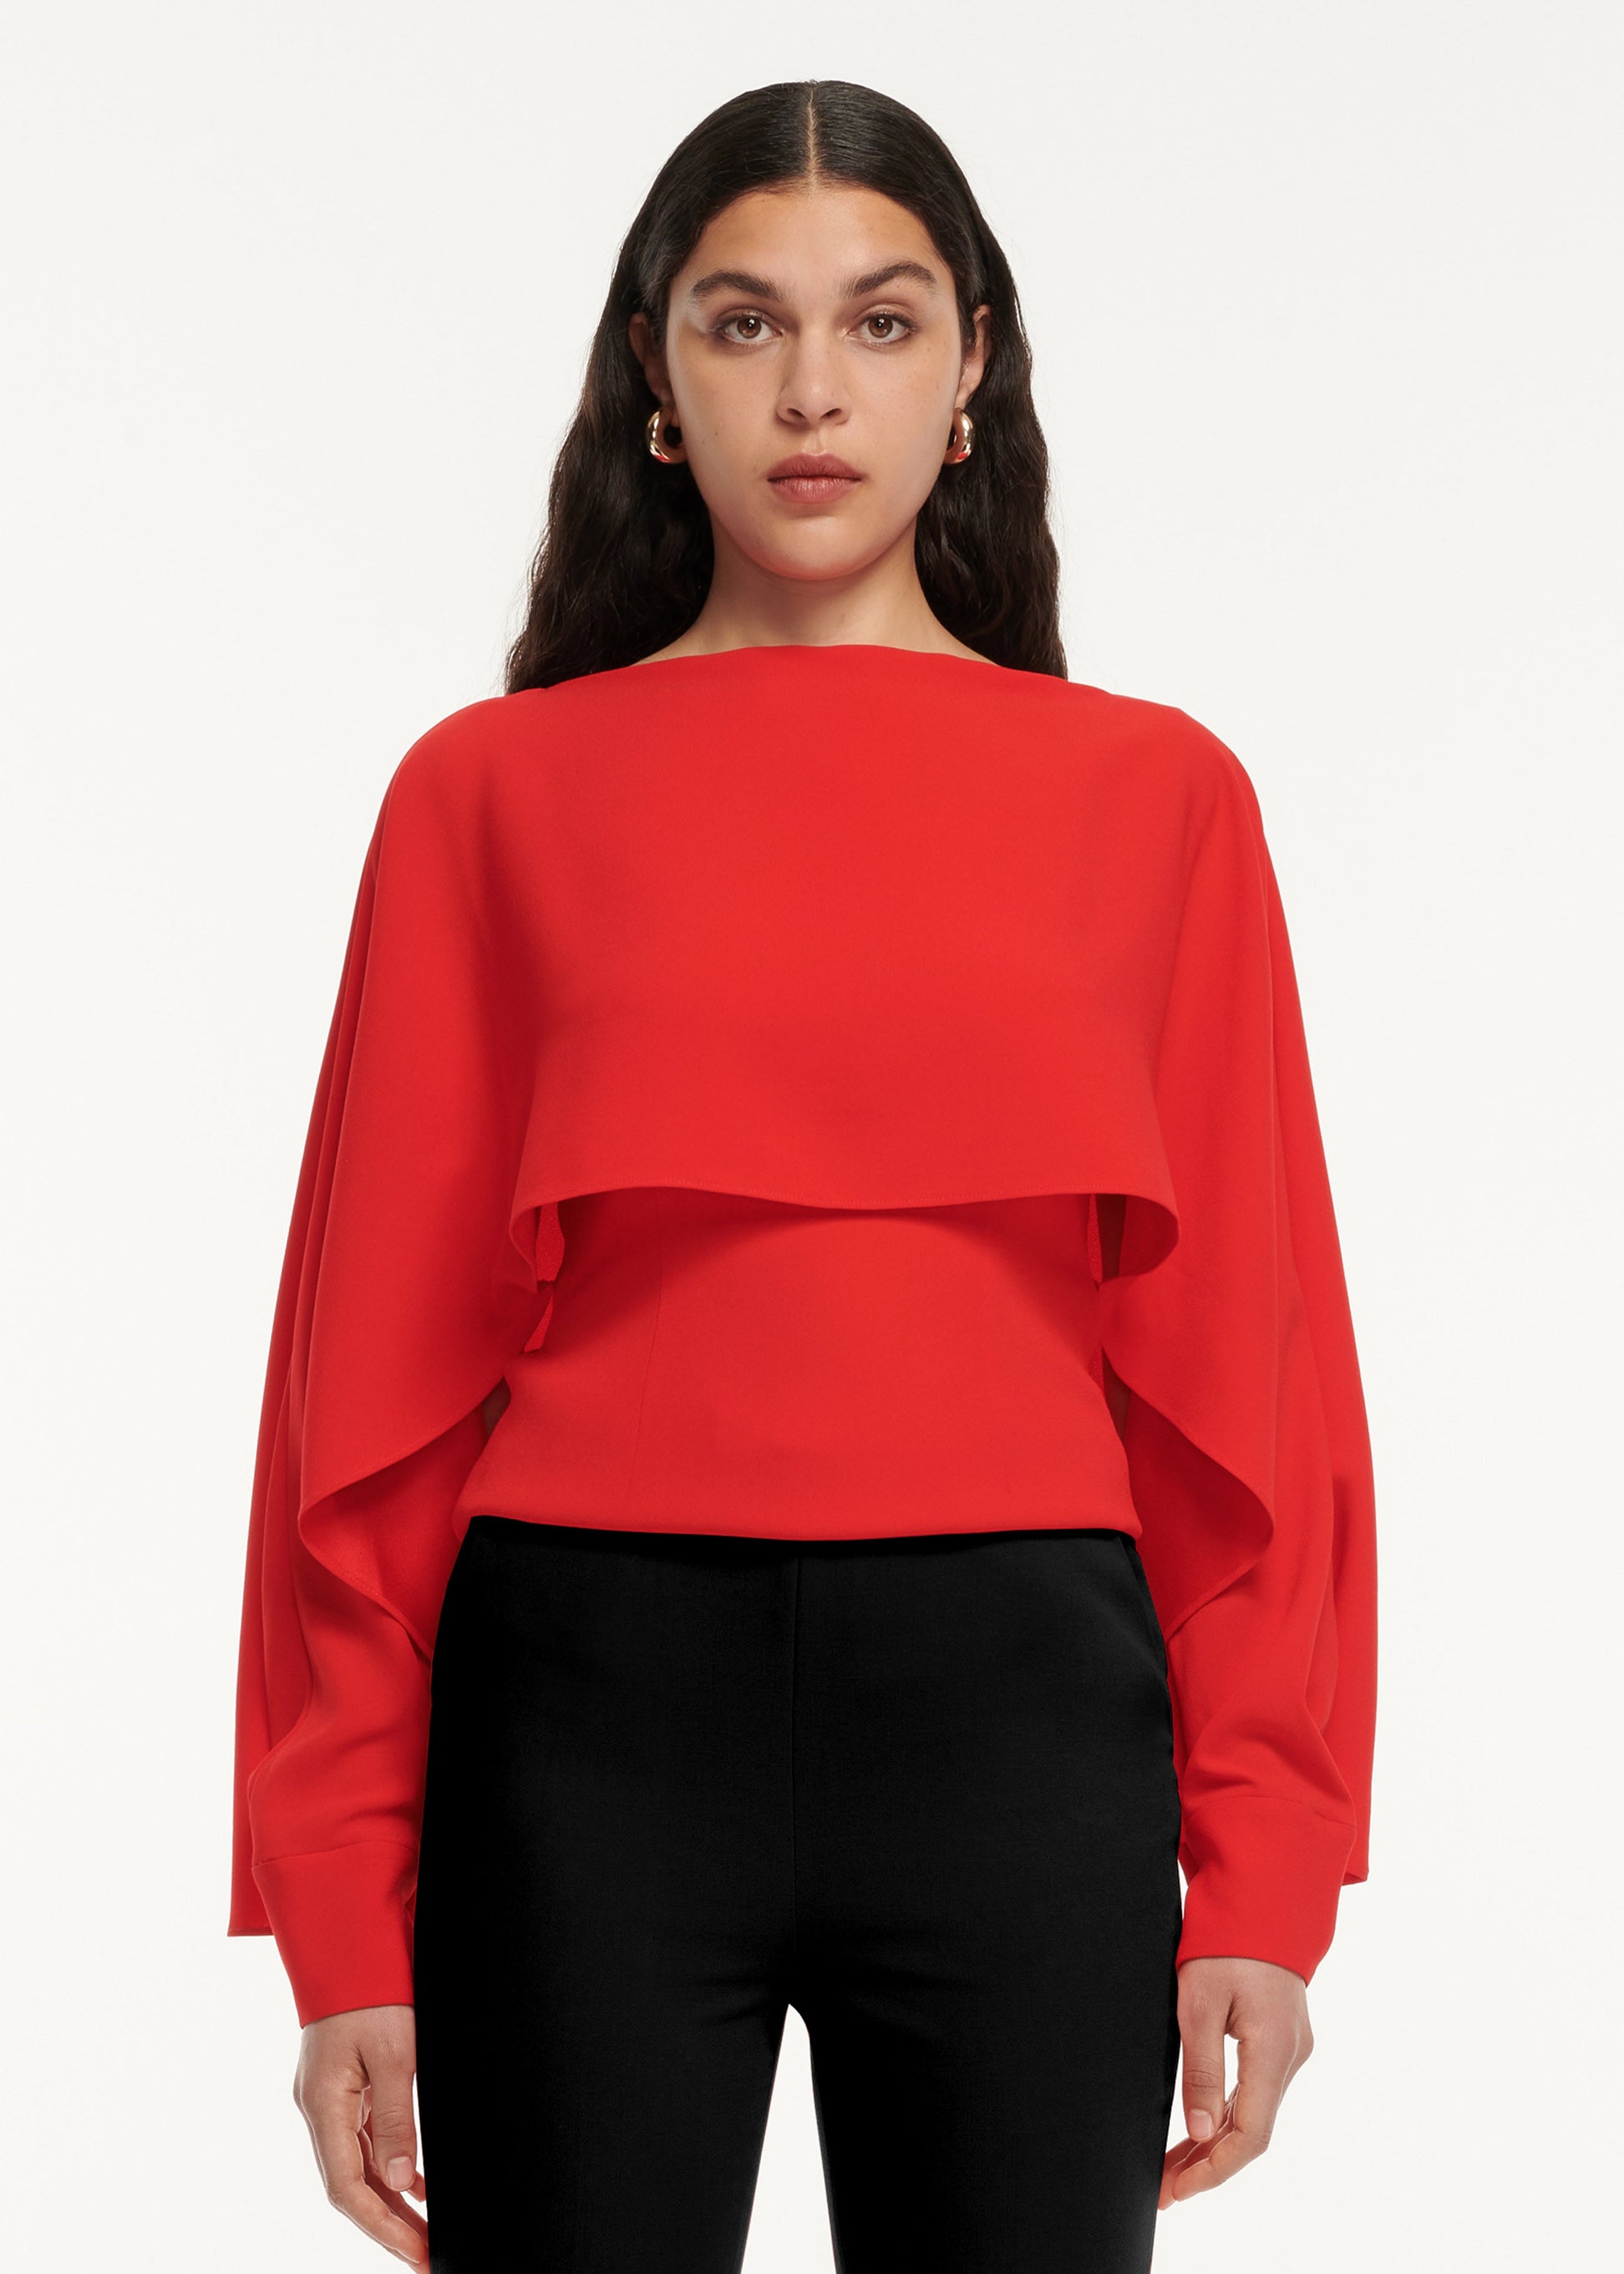 A close up of a woman wearing the Long Sleeve Satin Crepe Top Red